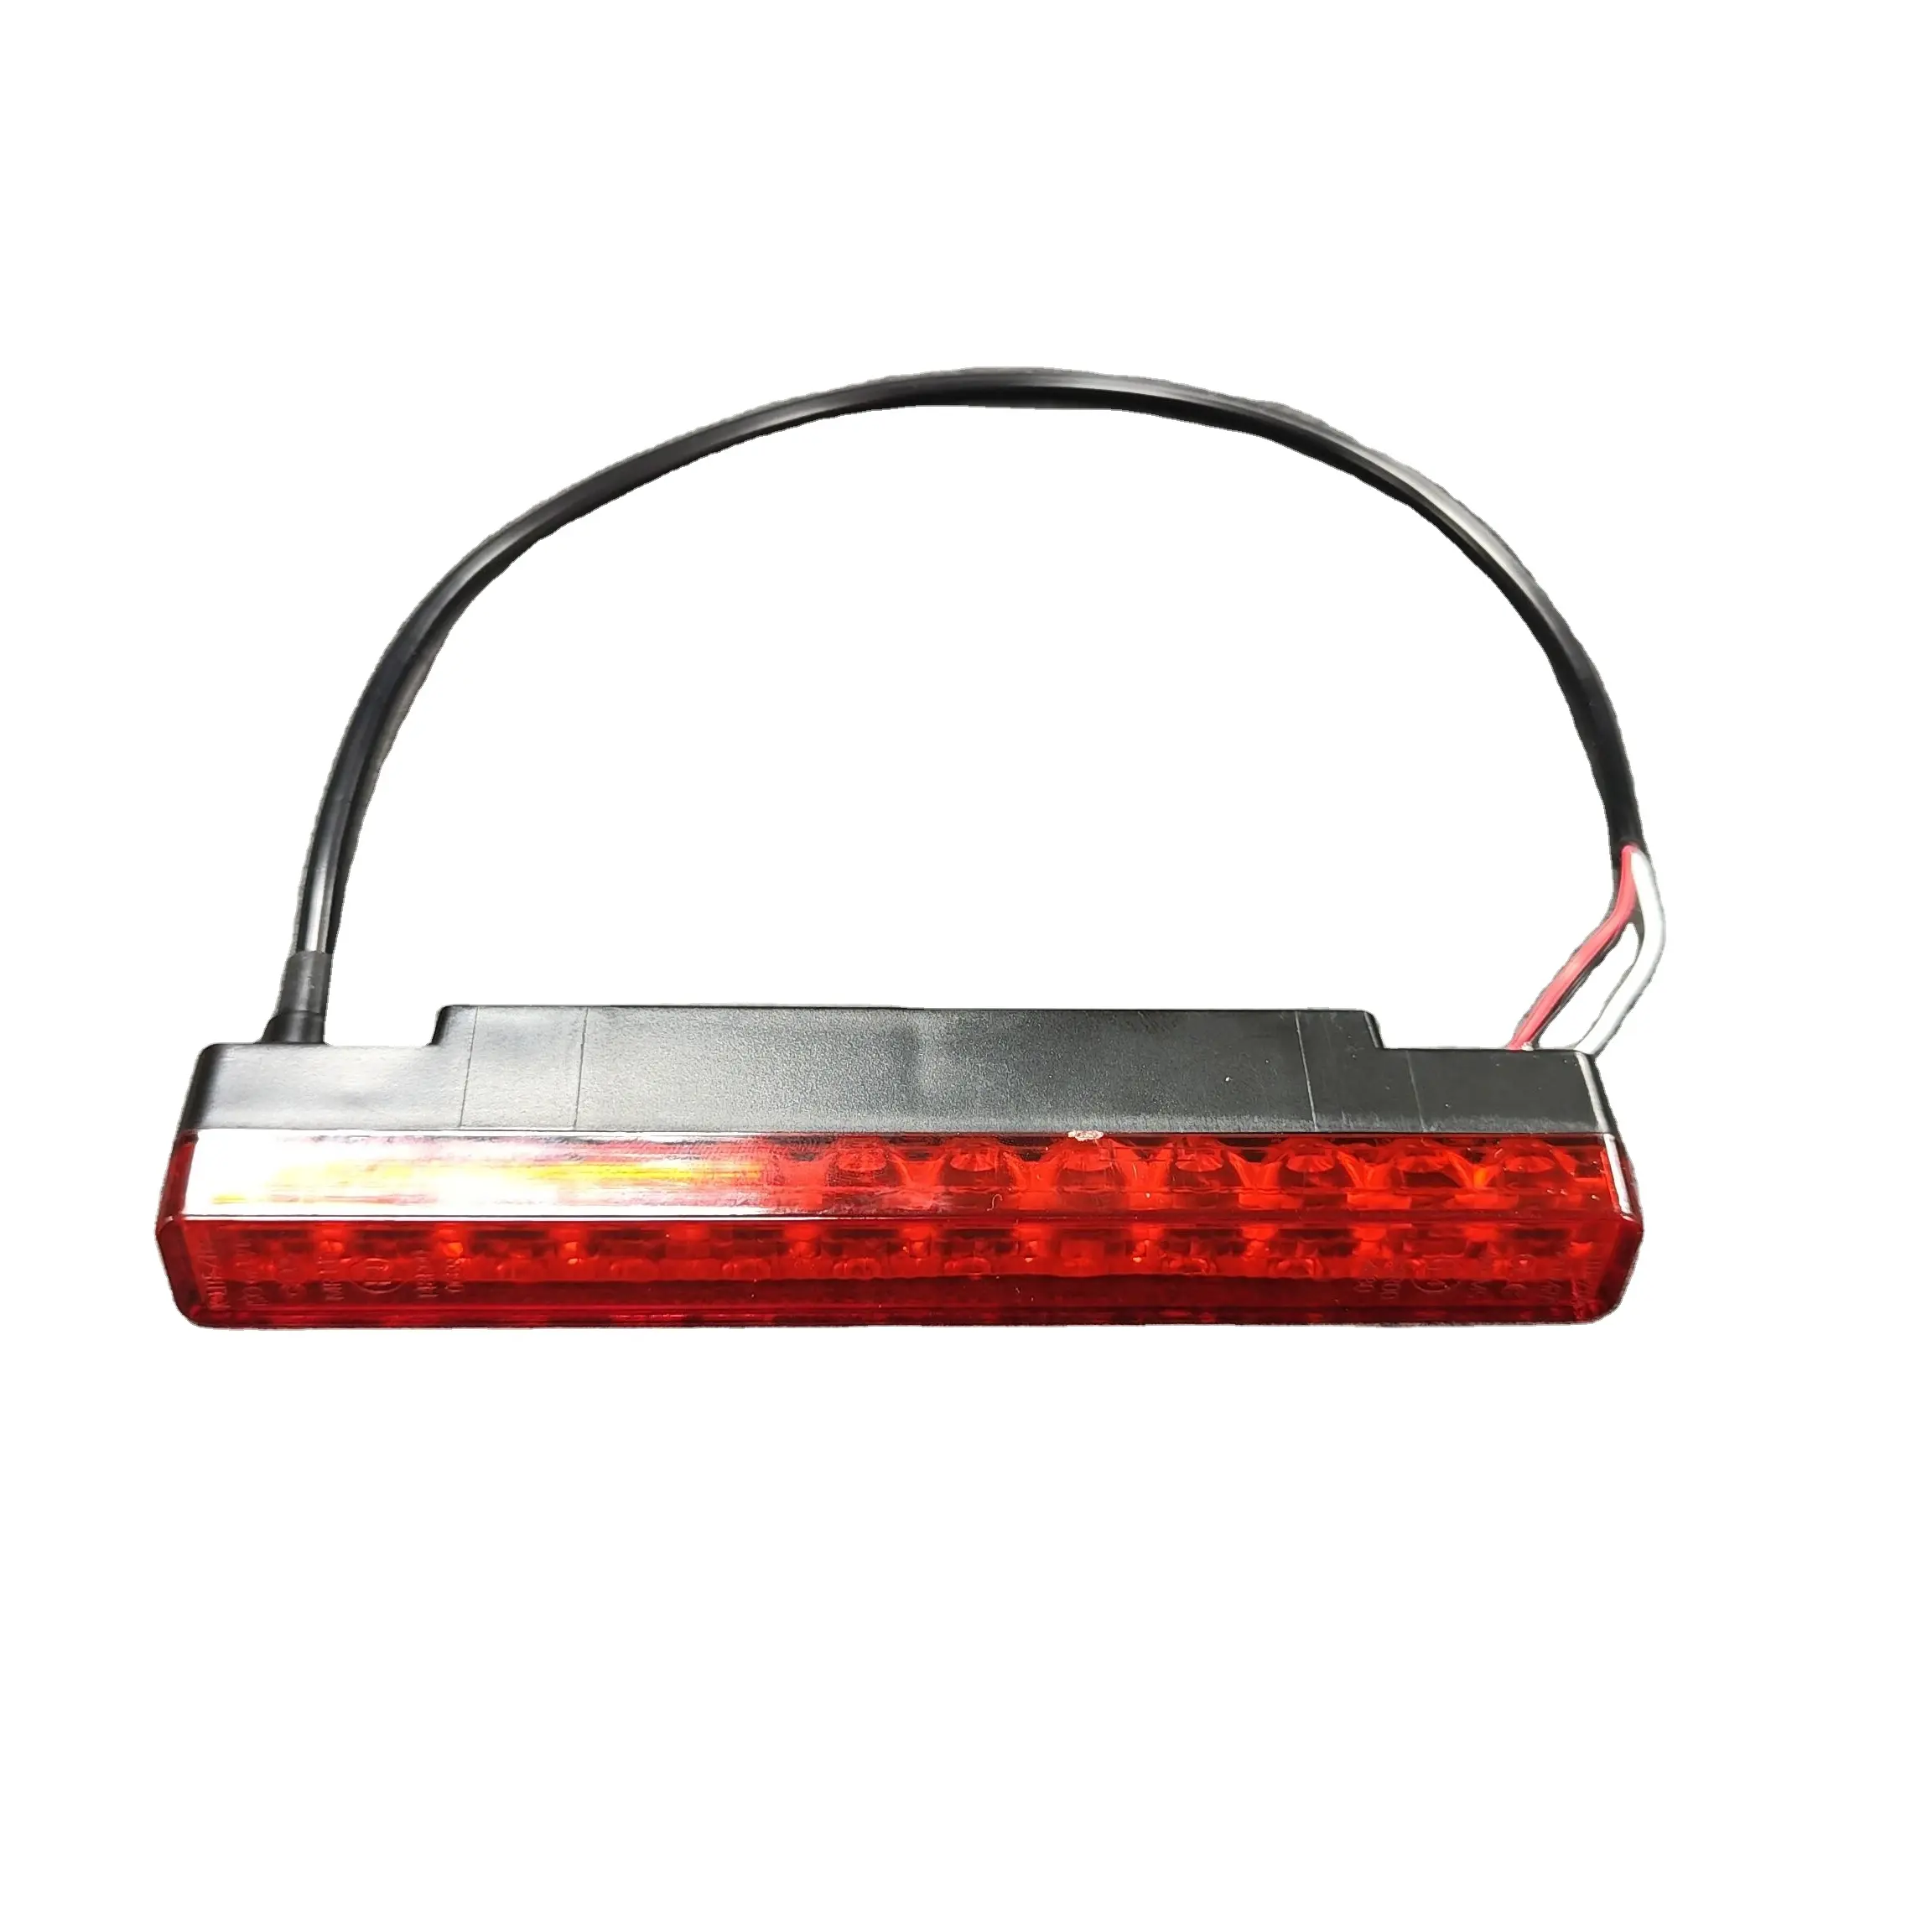 Motorcycle Scooter Rectangular Led Tail Light E-mark Approved Rear Position Lamp Of LZ118